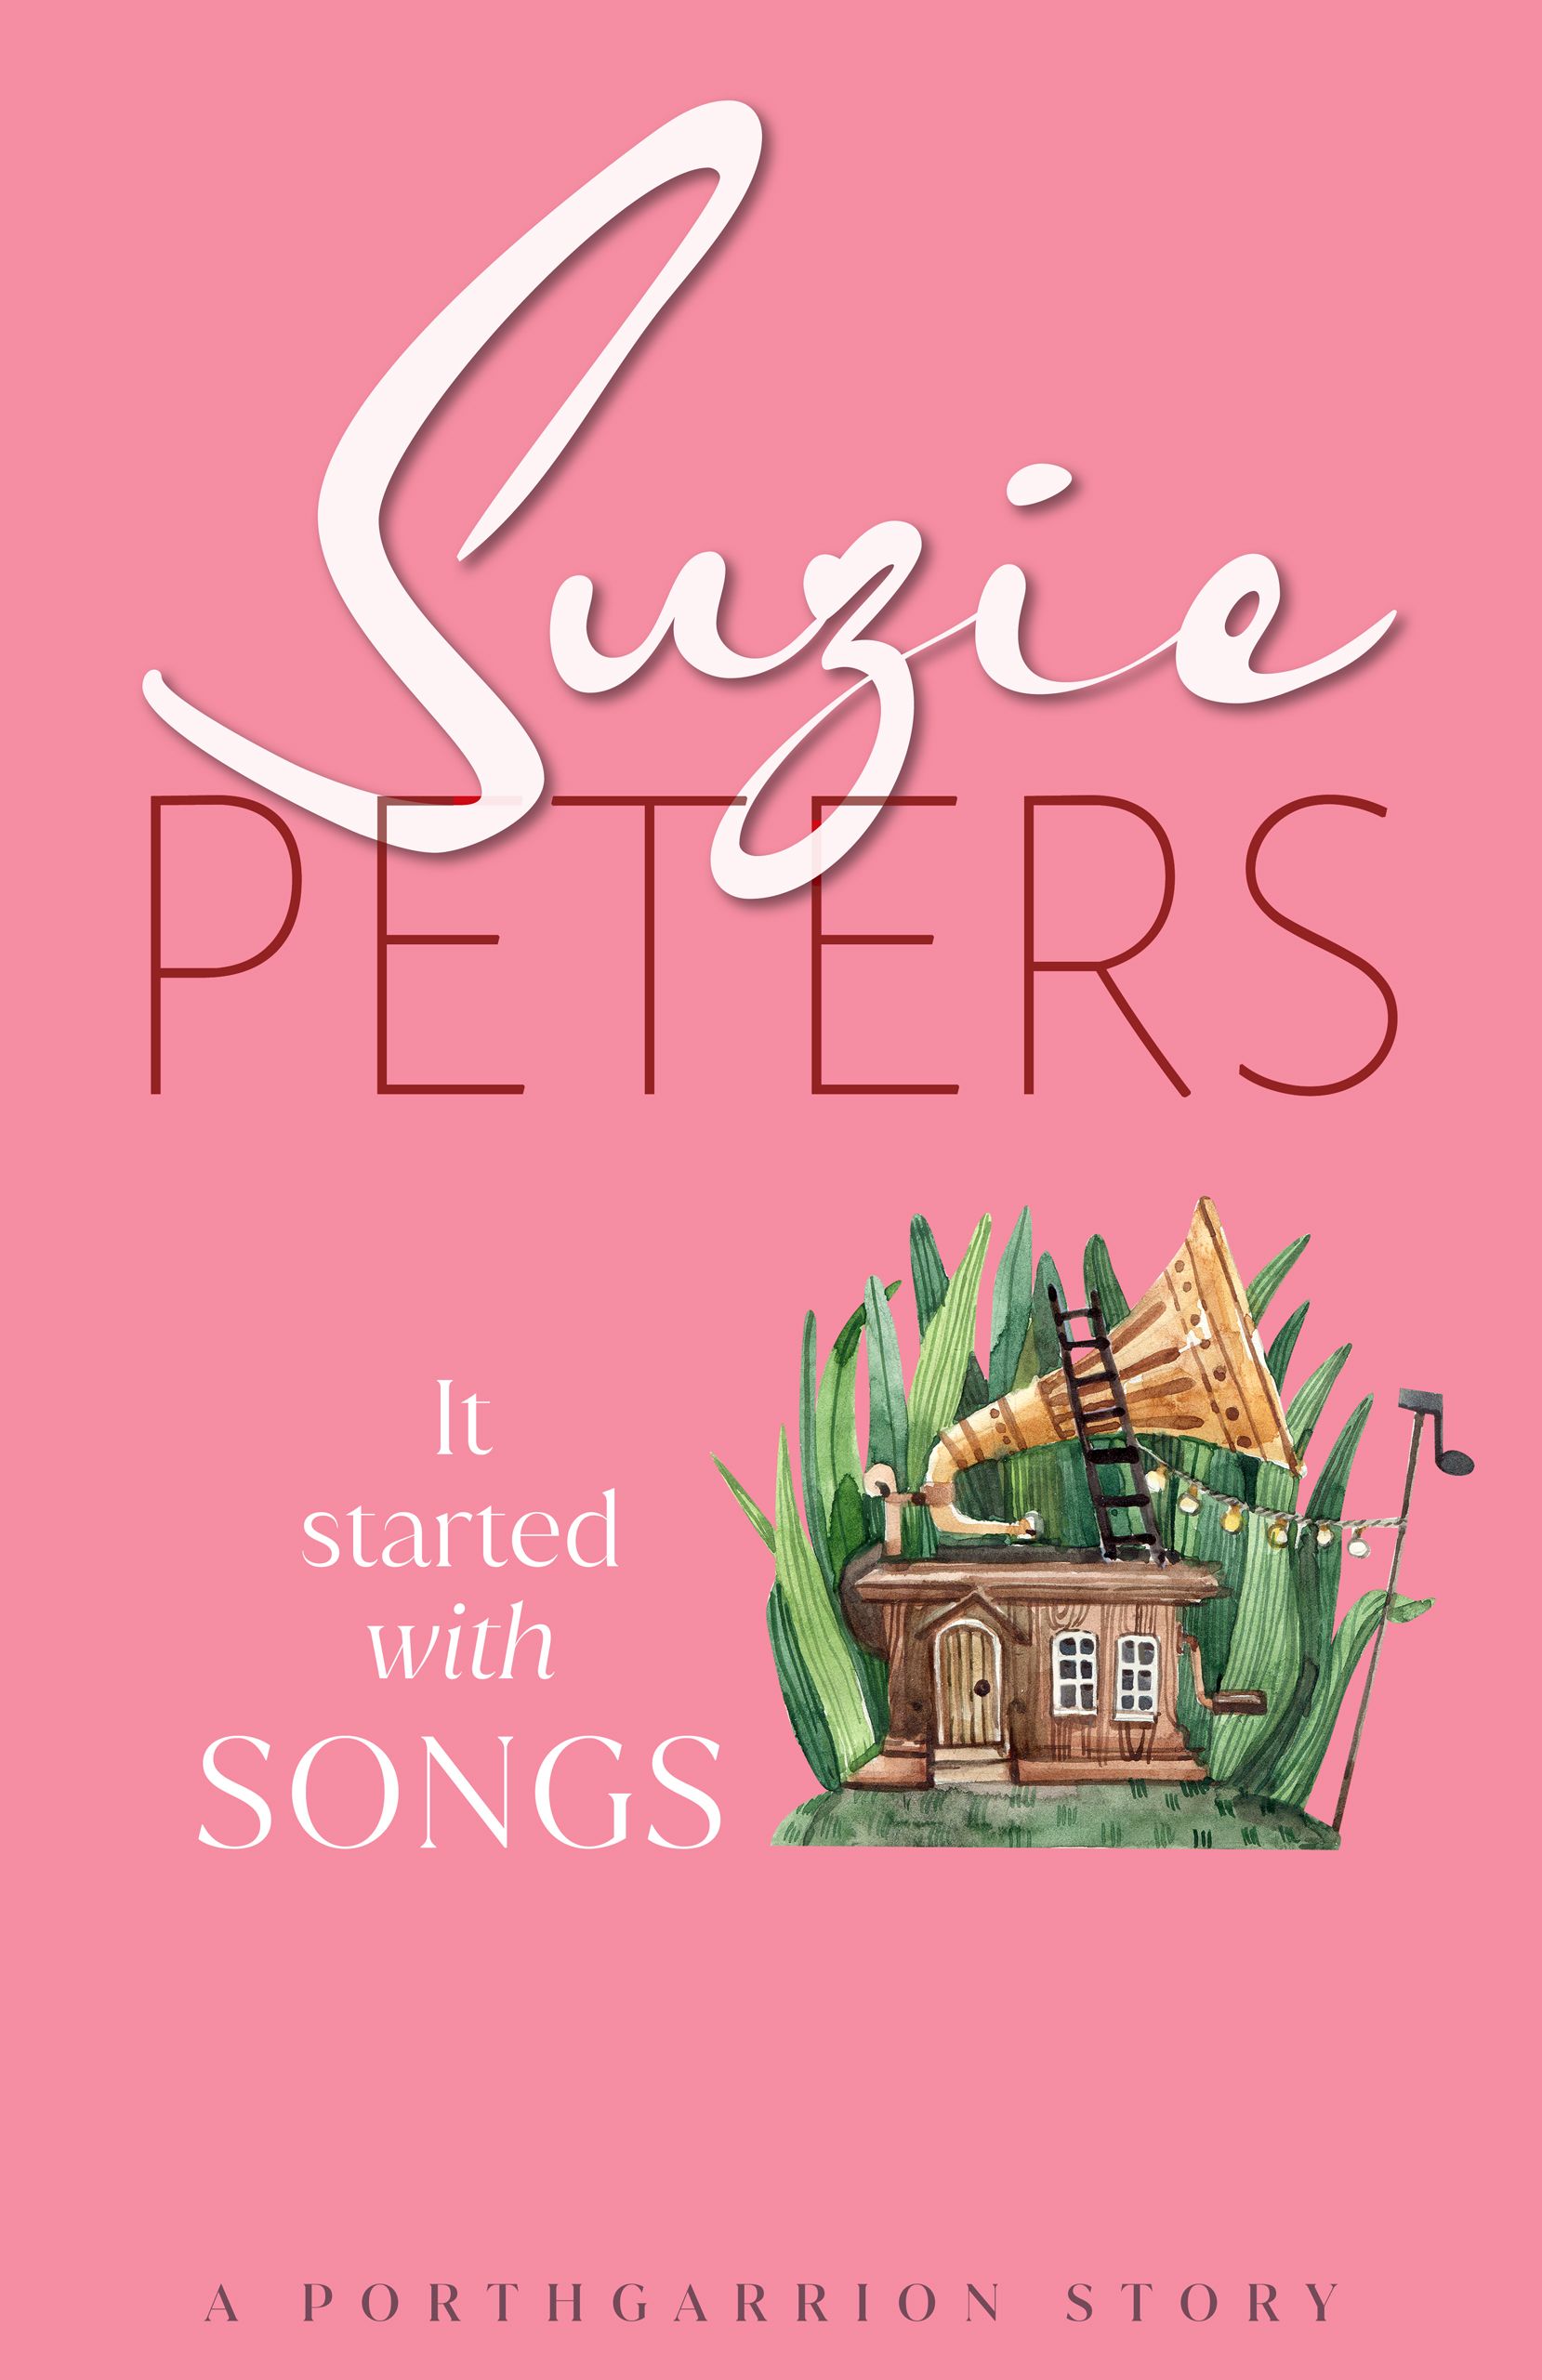 It Started with Songs by Suzie Peters cover graphic.